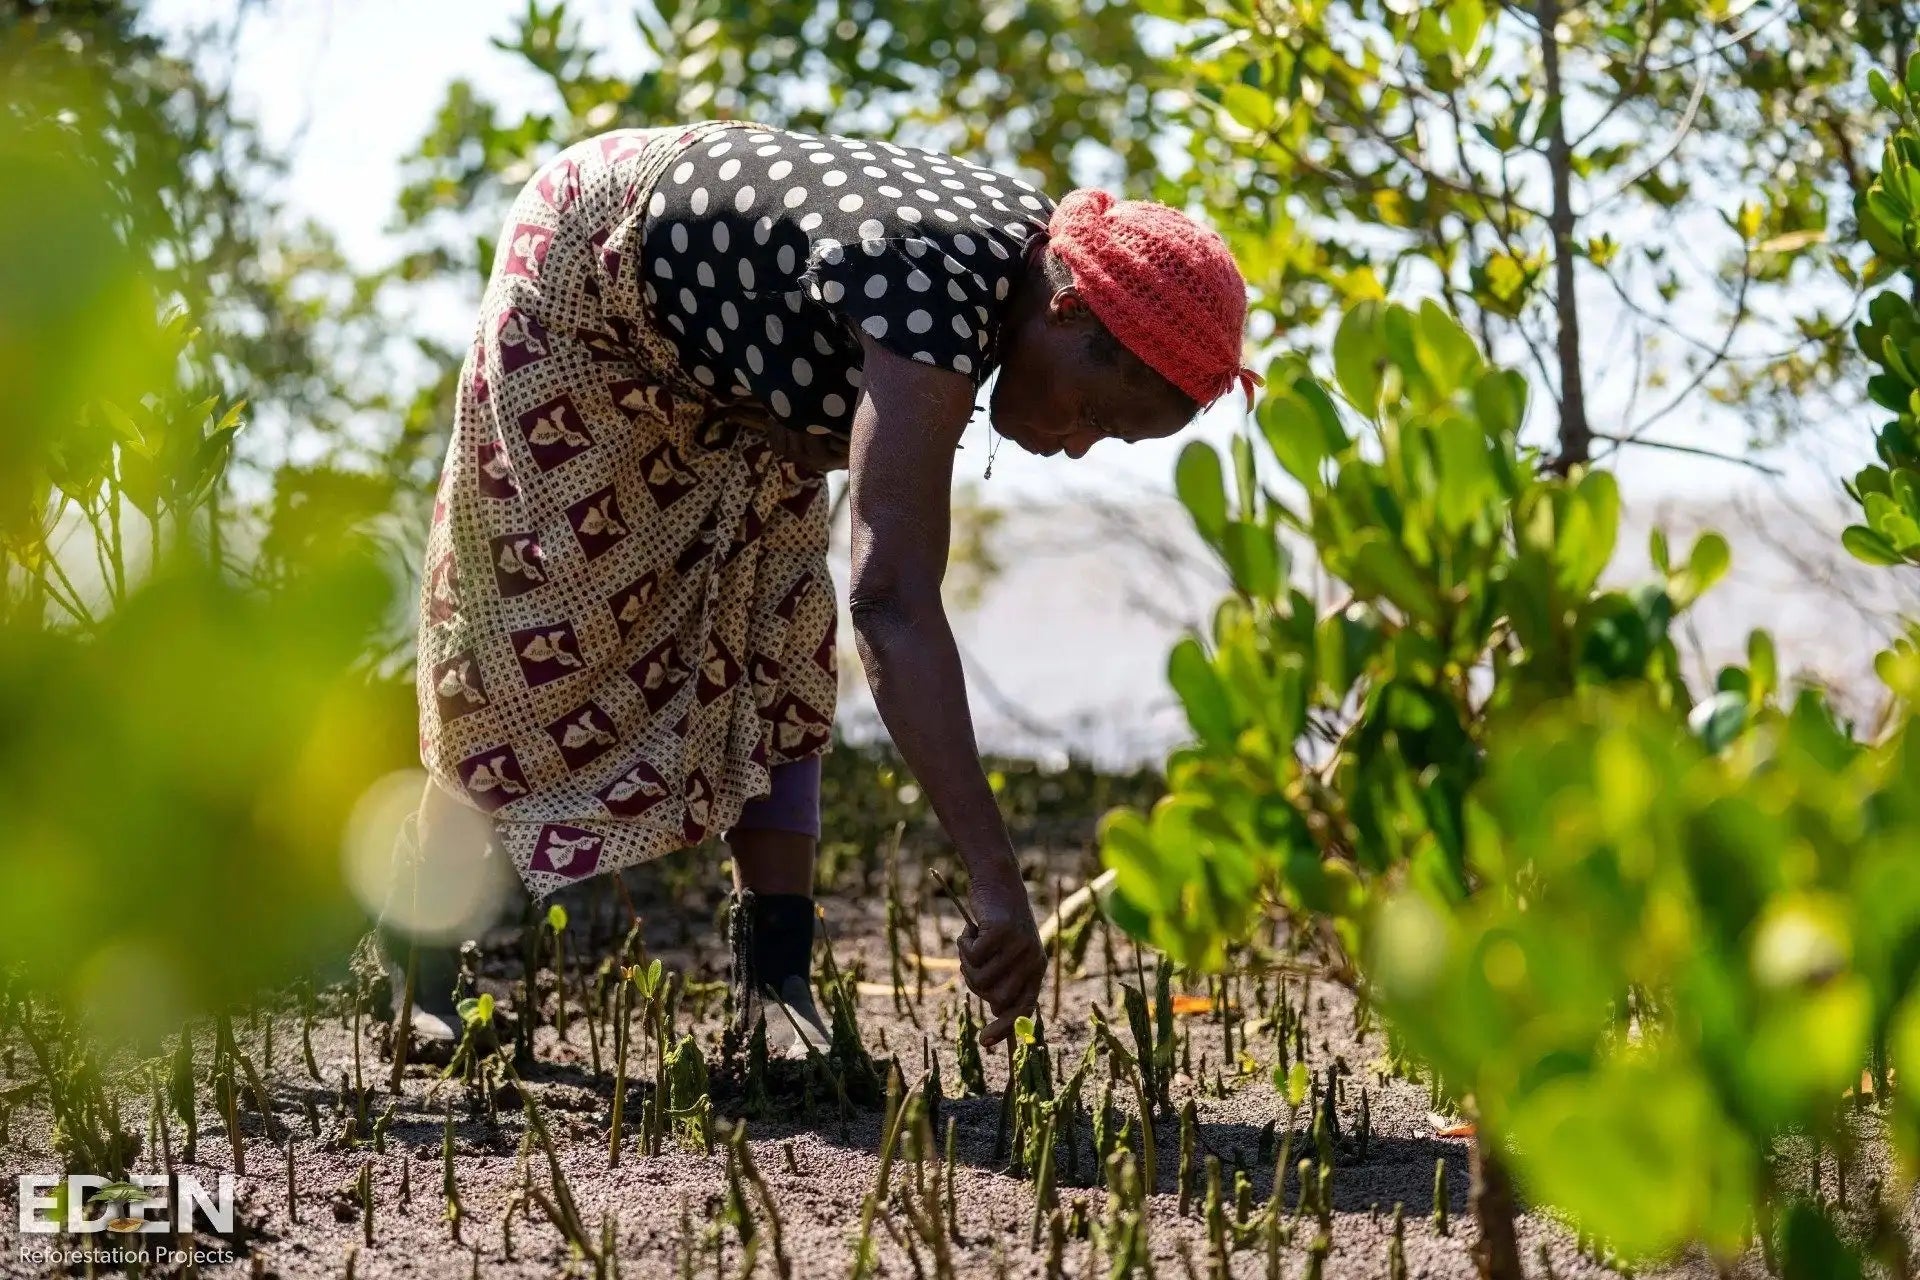 Woman planting trees in Mozambique with Eden Reforestation Projects